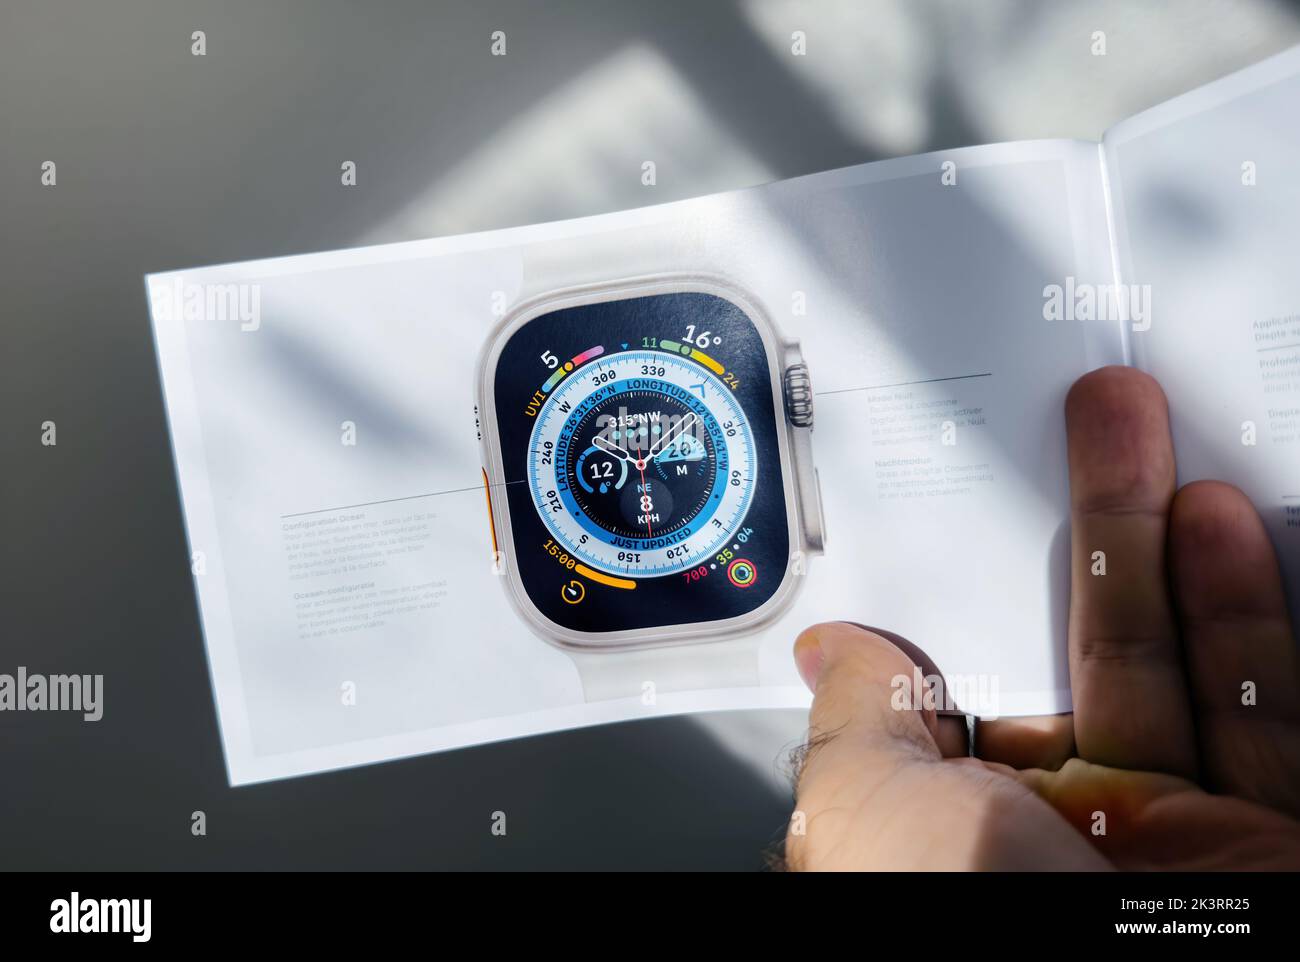 London, United Kingdom - Sep 27, 2022: POV male hand holding the marketing material of the new Apple Watch Series Ultra designed for extreme activities like endurance sports, elite athletes Stock Photo